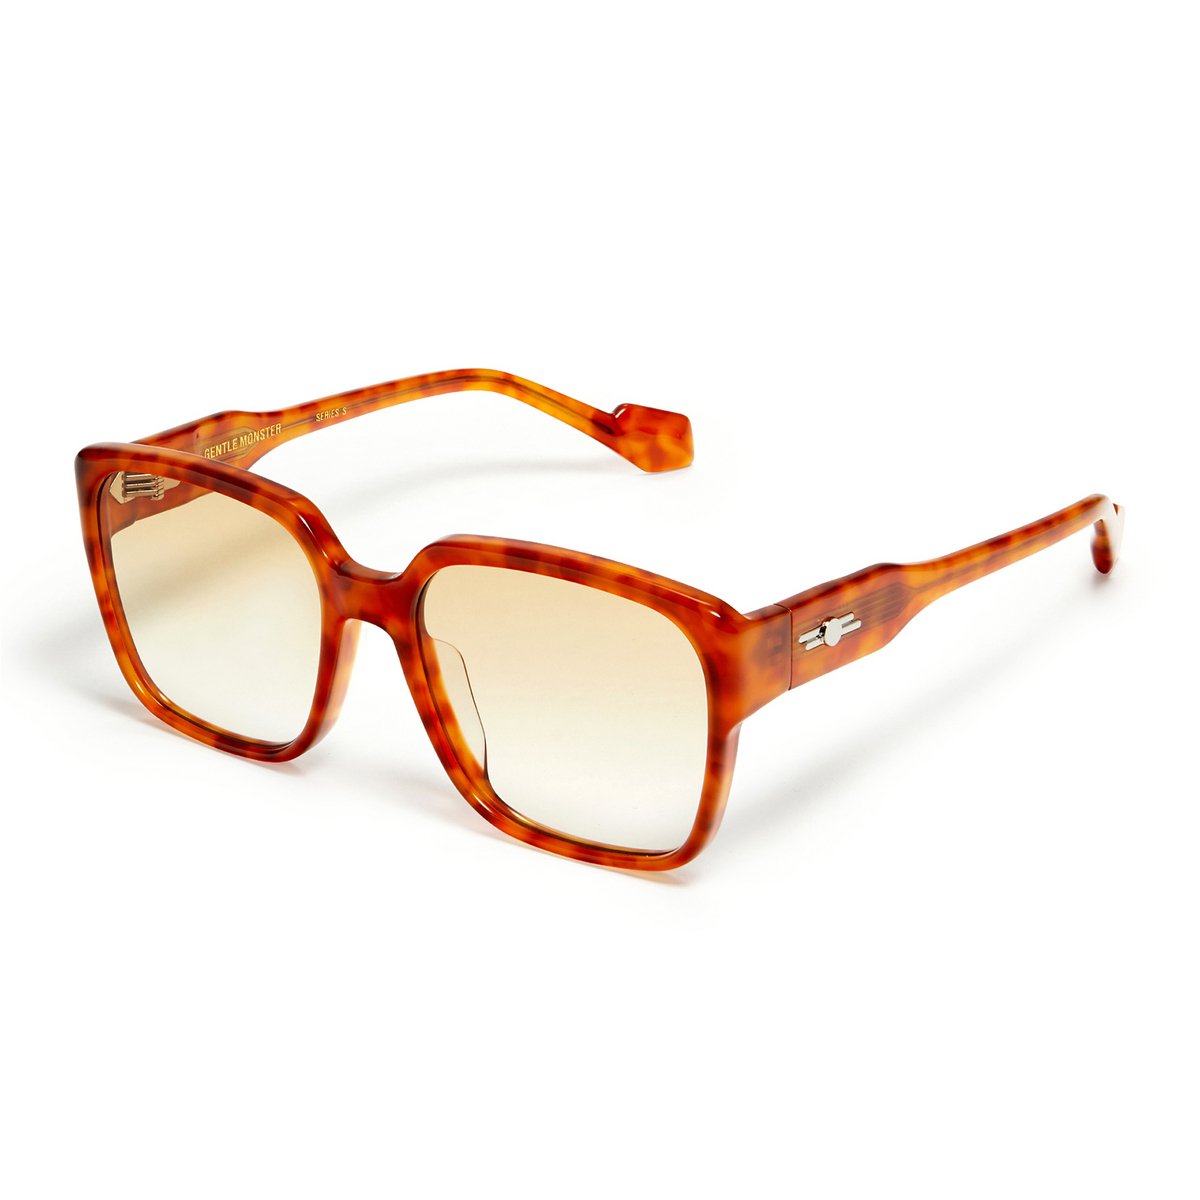 Gentle Monster® Square Eyeglasses: Loopy color L1 Brown Tortoise - three-quarters view